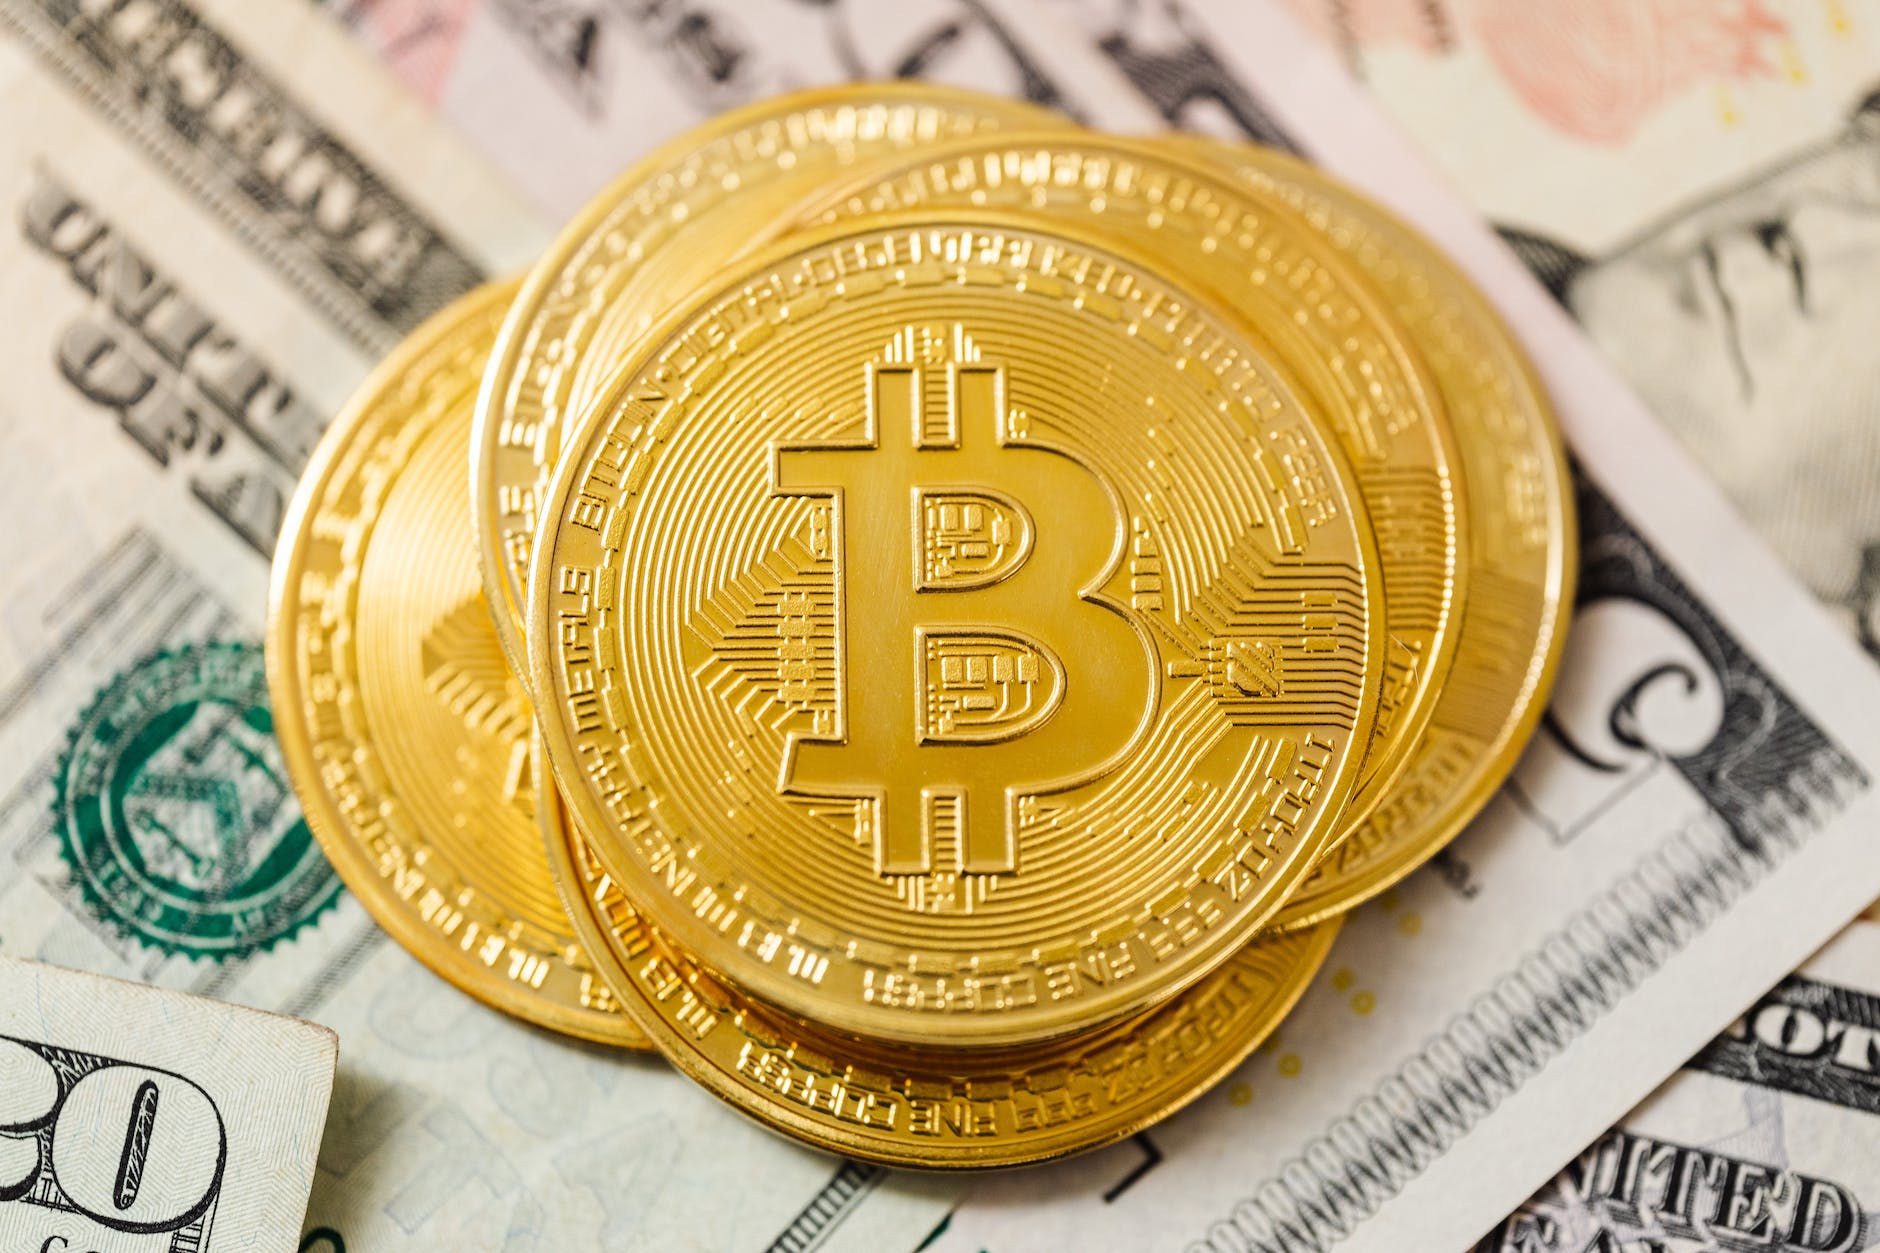 Bitcoin as a Legal Tender: What Does That Mean for All of Us?